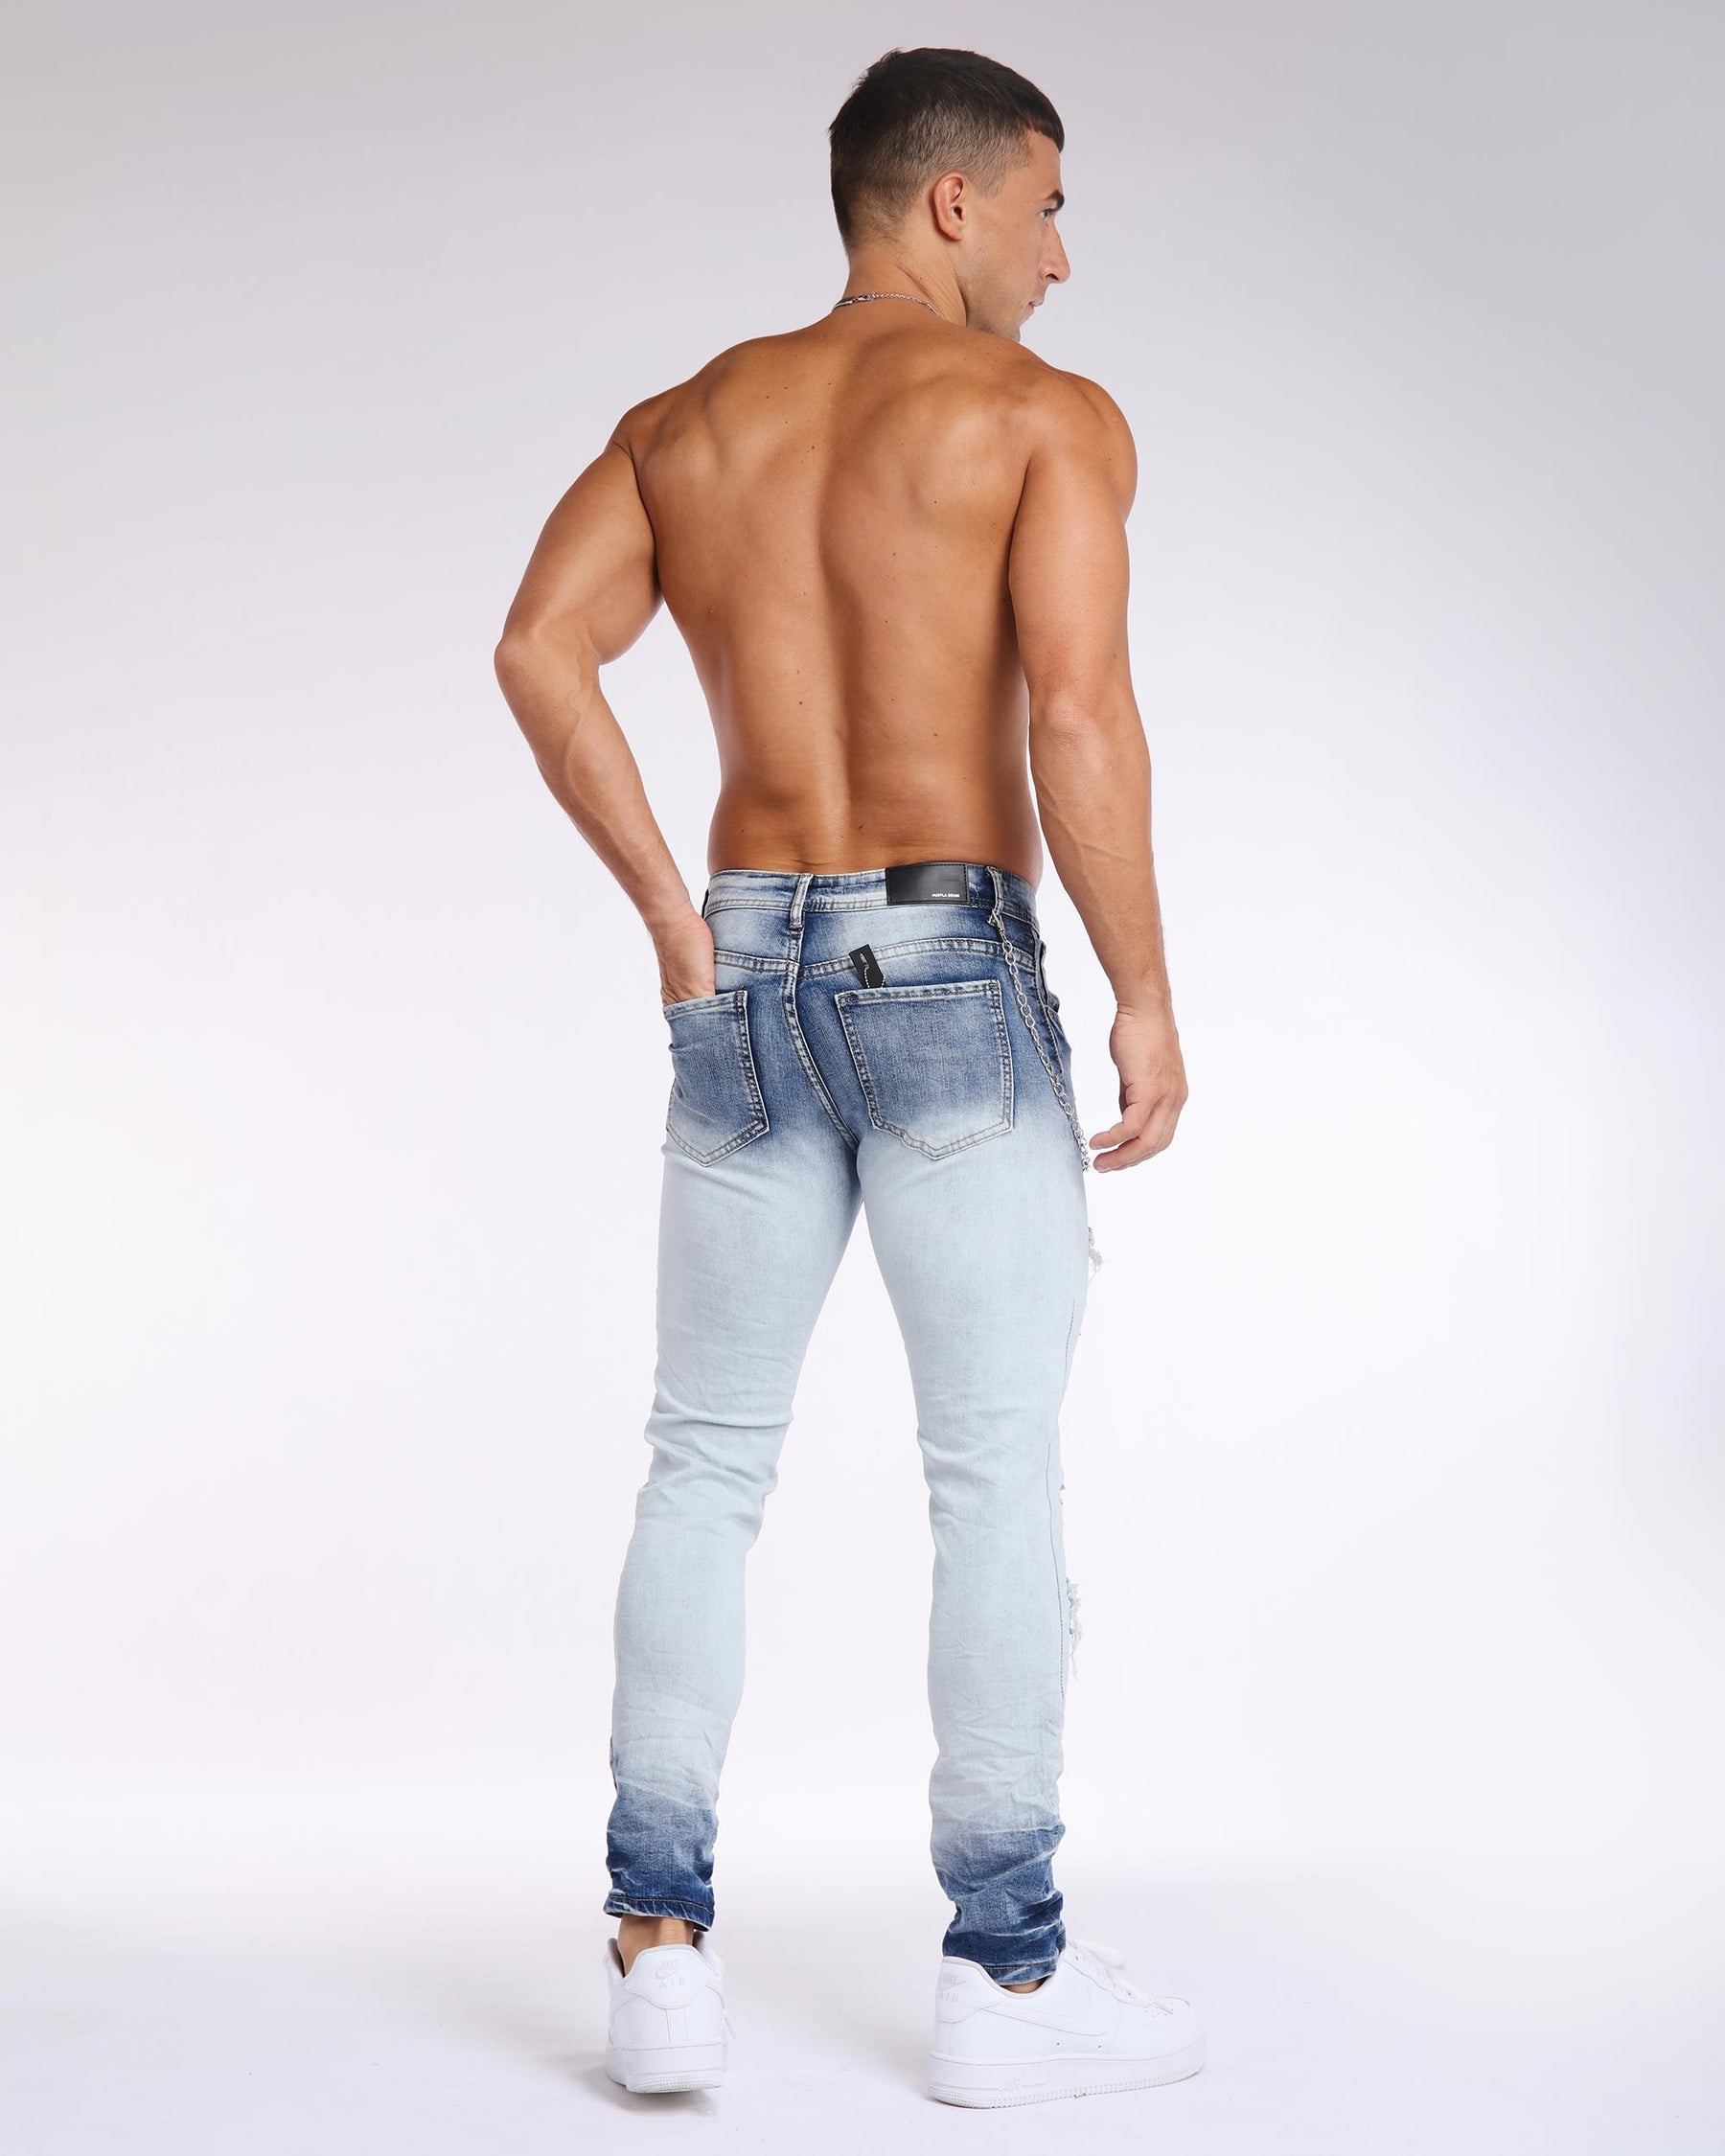 LOGEQI Slim Fit Blue Ripped Jeans in Light Wash